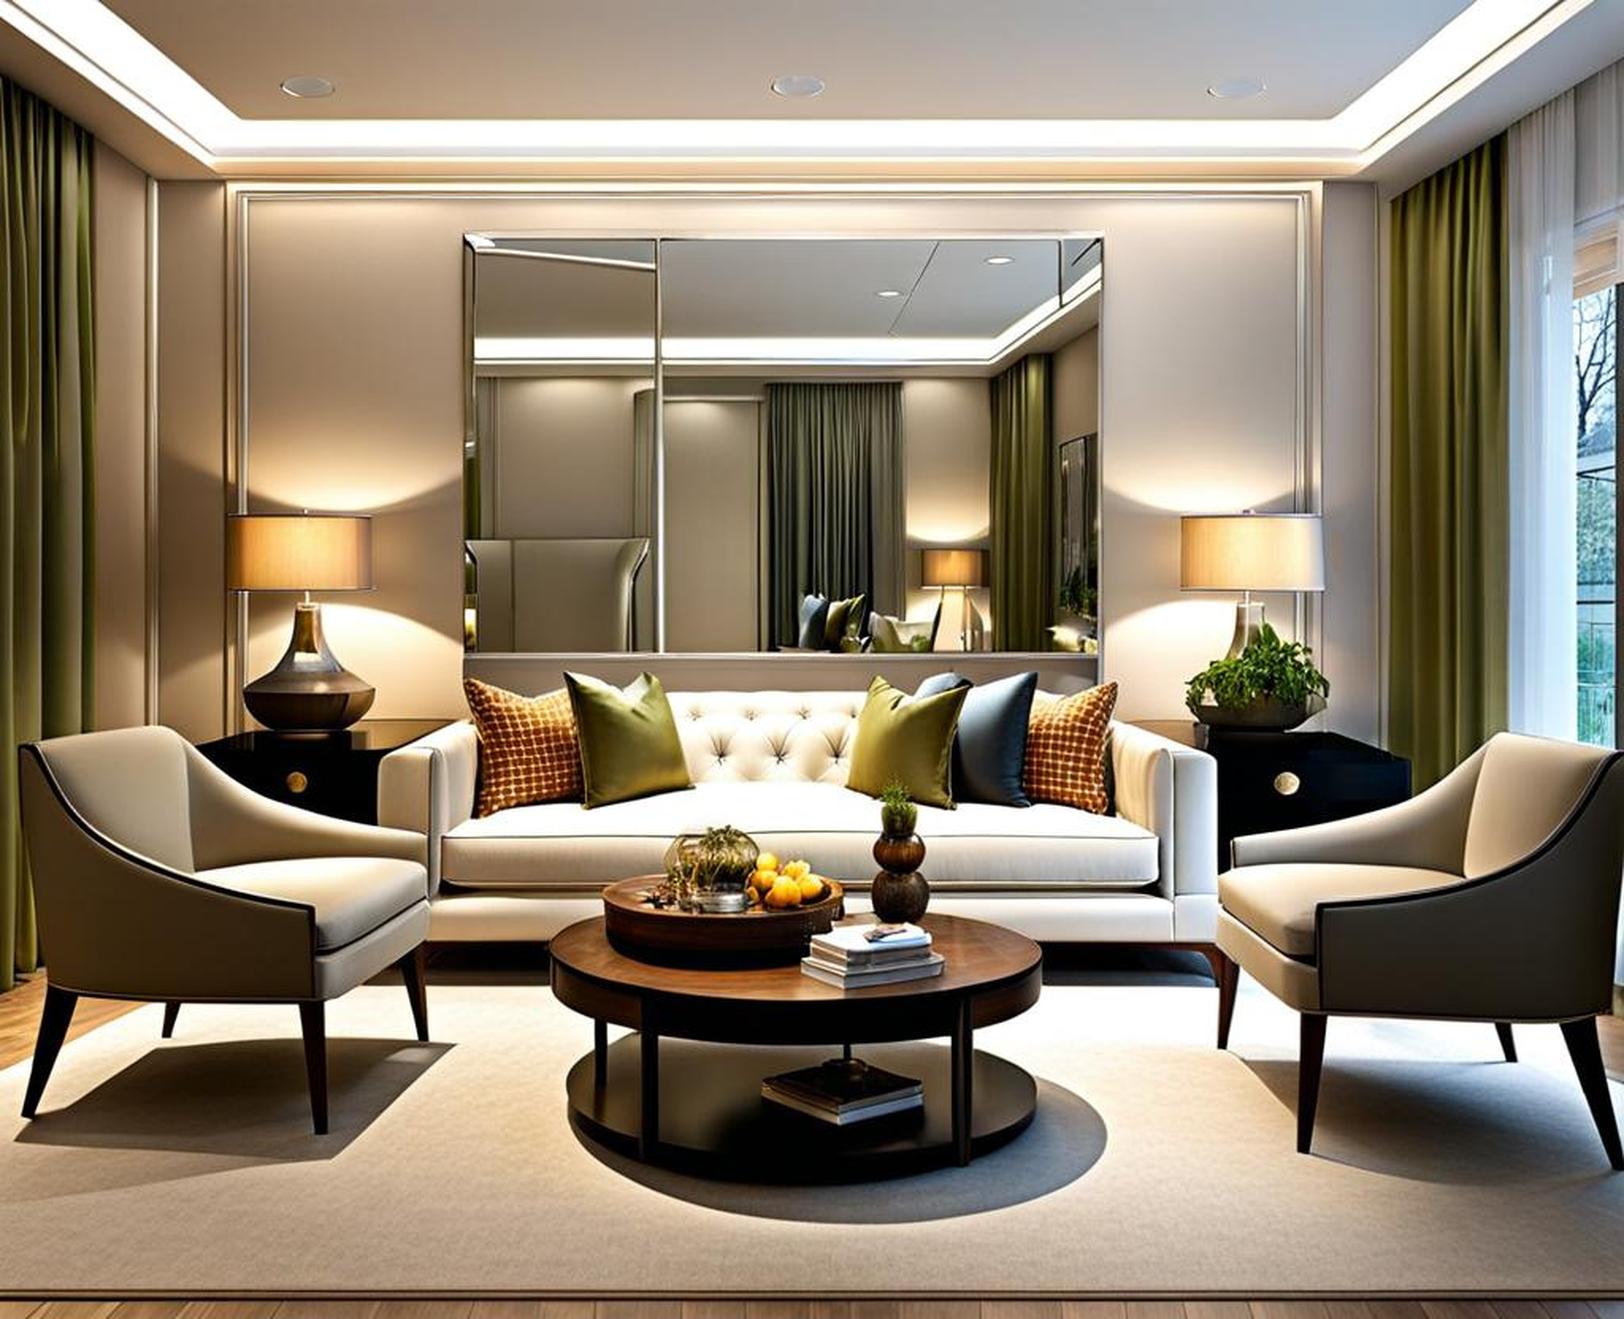 Cleverly Using Mirrors to Visually Enlarge Small Living Rooms